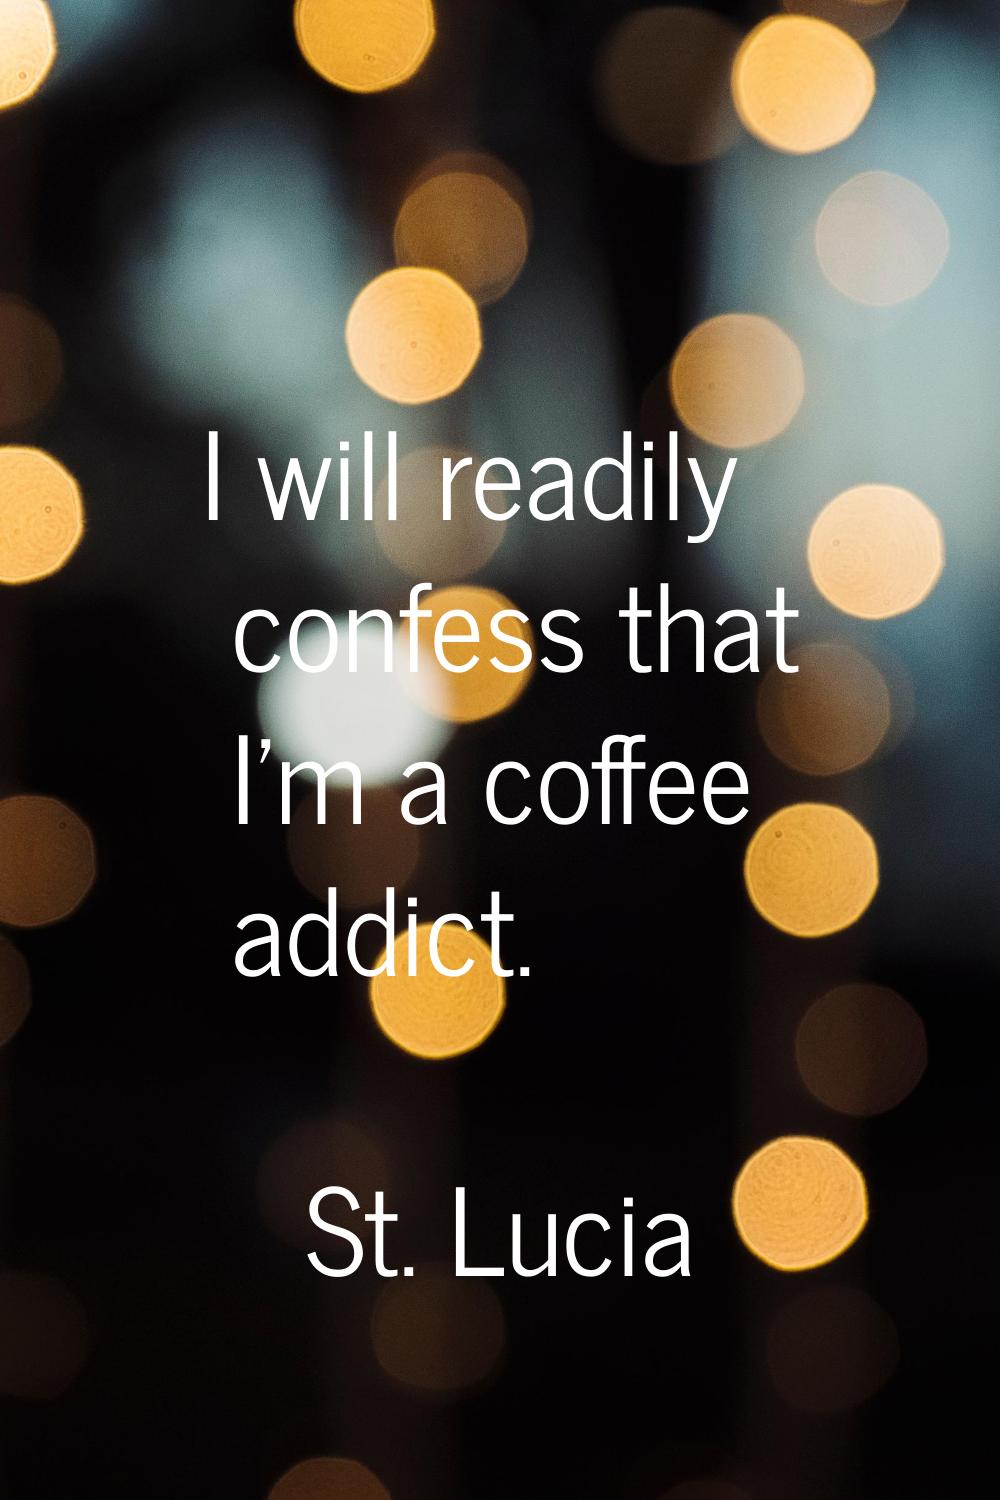 I will readily confess that I'm a coffee addict.